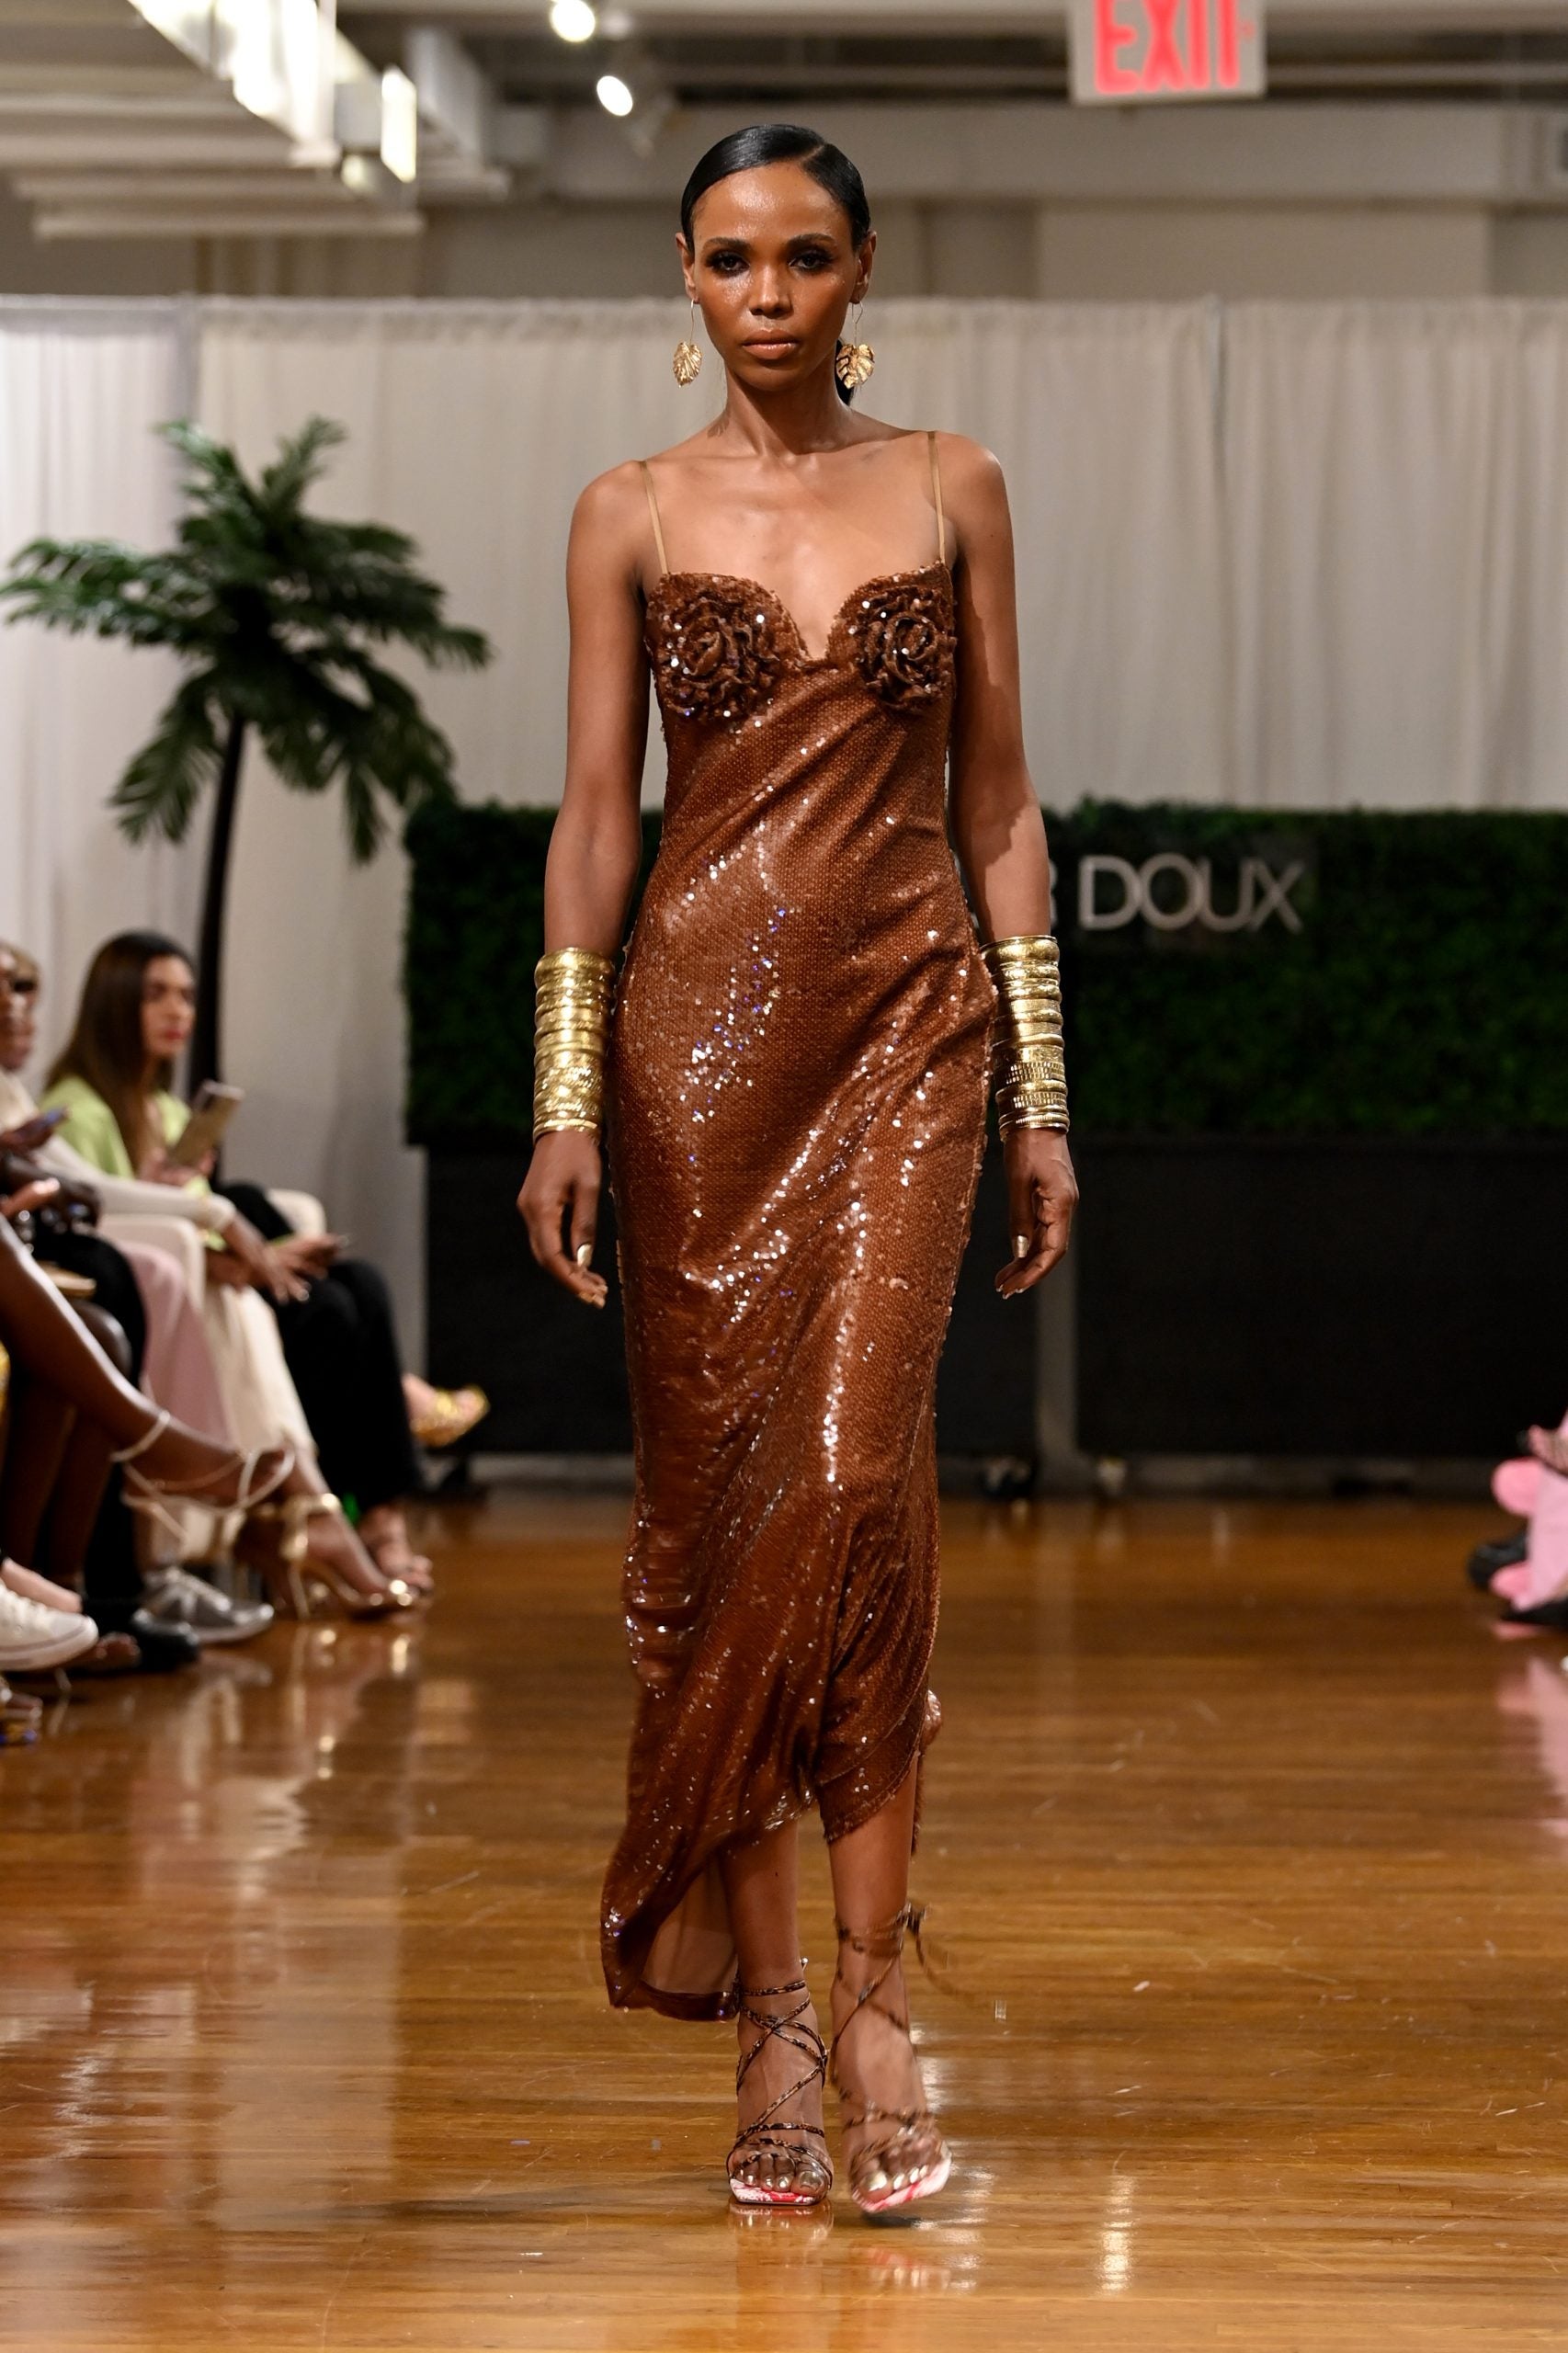 Dur Doux’s Spring / Summer 2023 Runway Showcases Floridian-Inspired Laxed Luxury